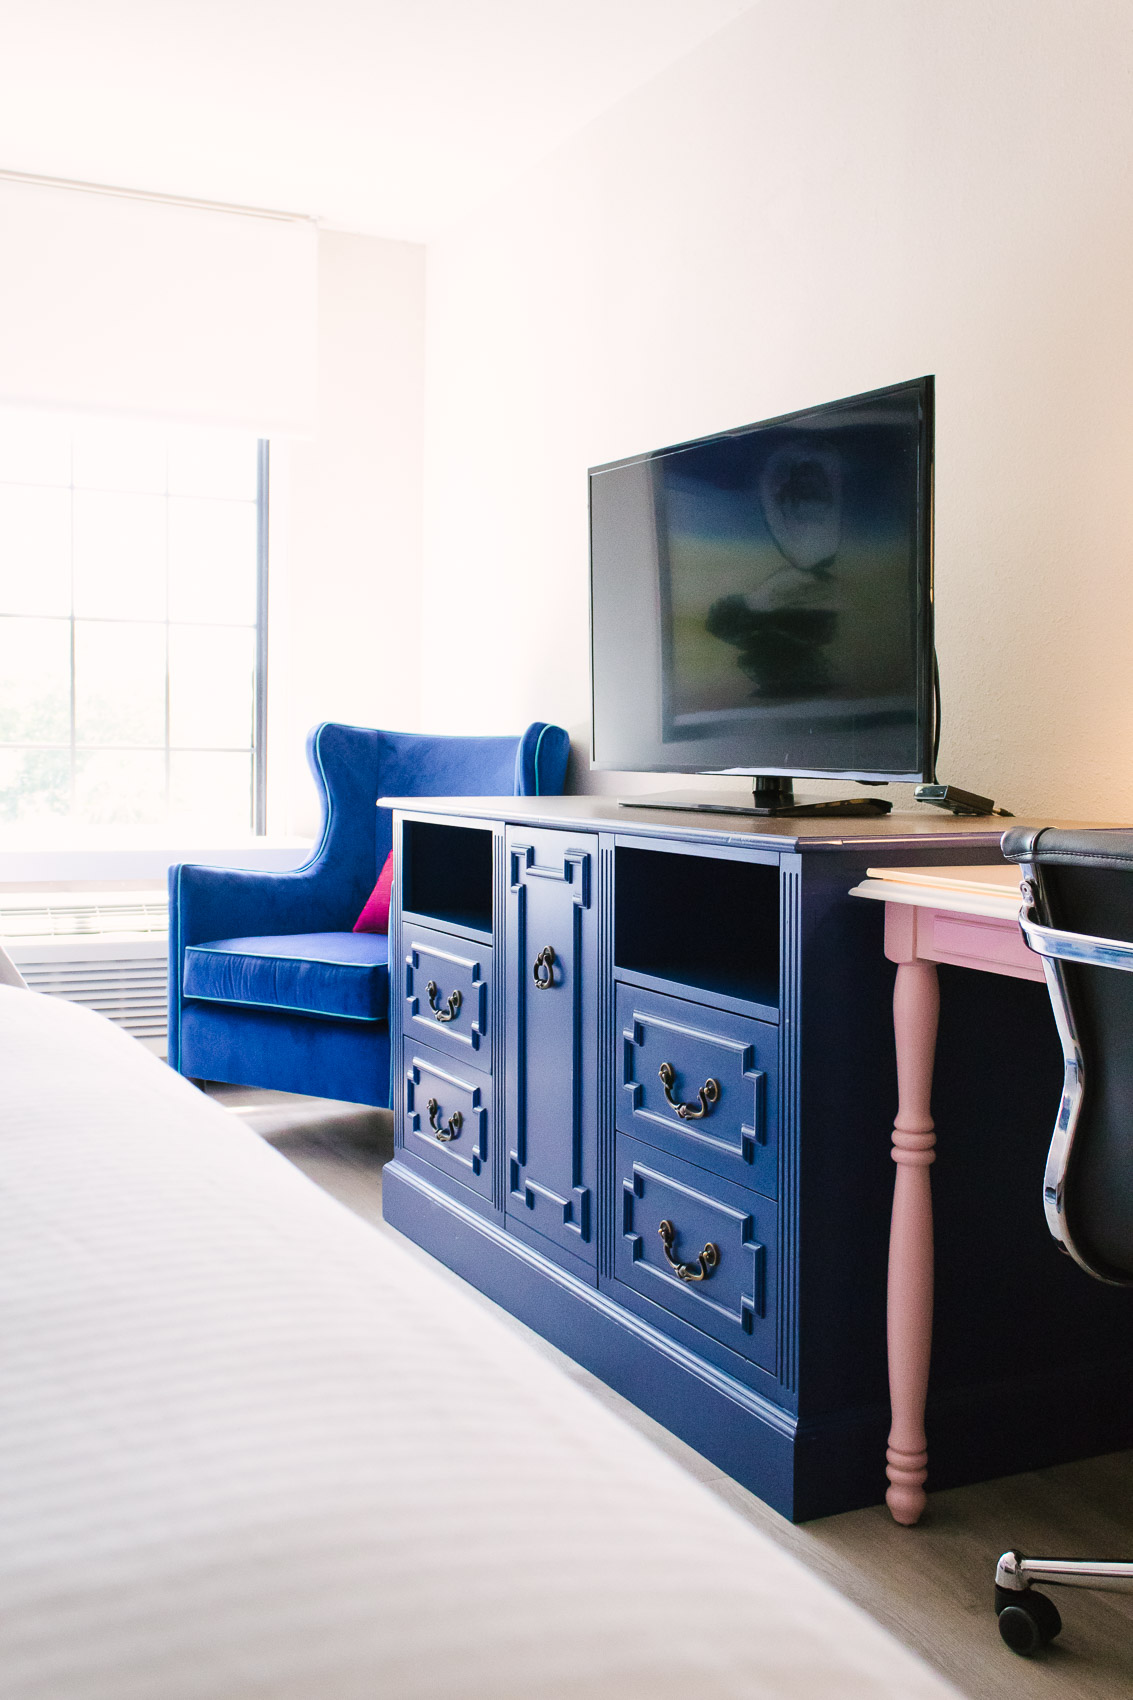 Where to stay in Mount Pleasant, SC: Hotel Indigo - a pet-friendly boutique hotel reflecting the elegant, hip, beachy atmosphere of this sunny oceanfront Charleston suburb. | Travel Blogger | Blue Velvet Chair Decor, Pink Desk, Blue Dresser